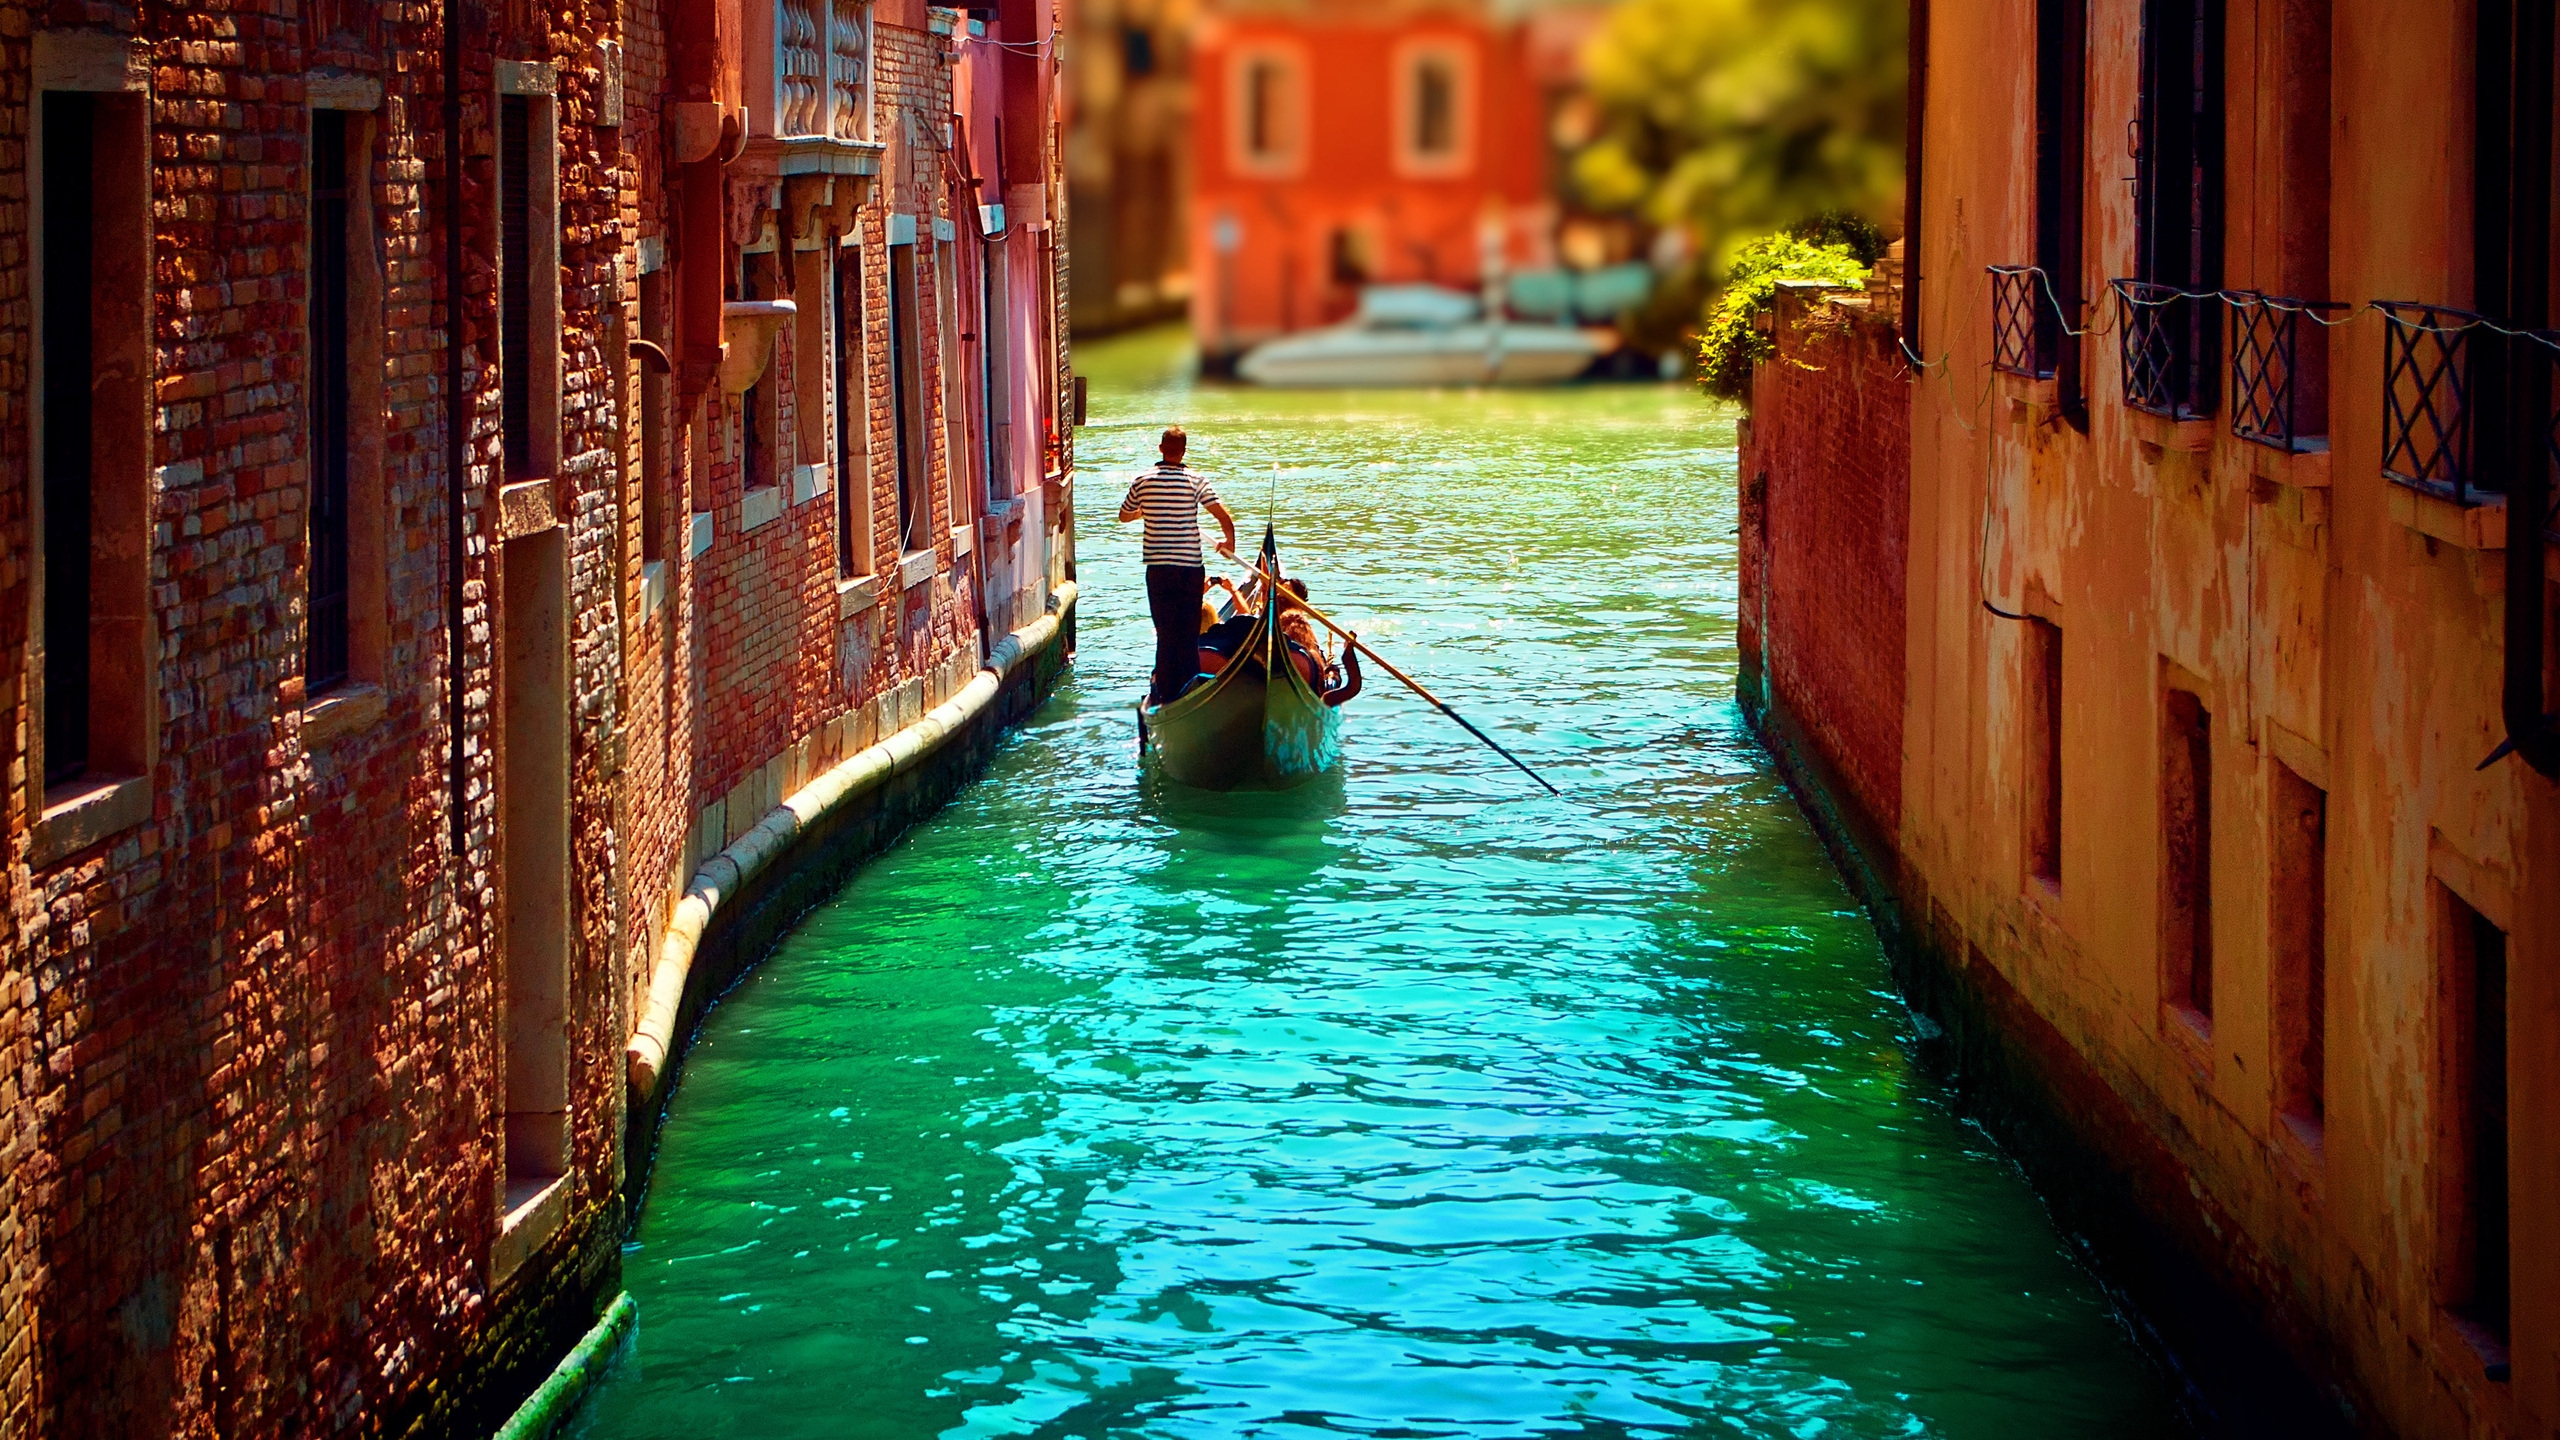 Venice Canal for 2560x1440 HDTV resolution